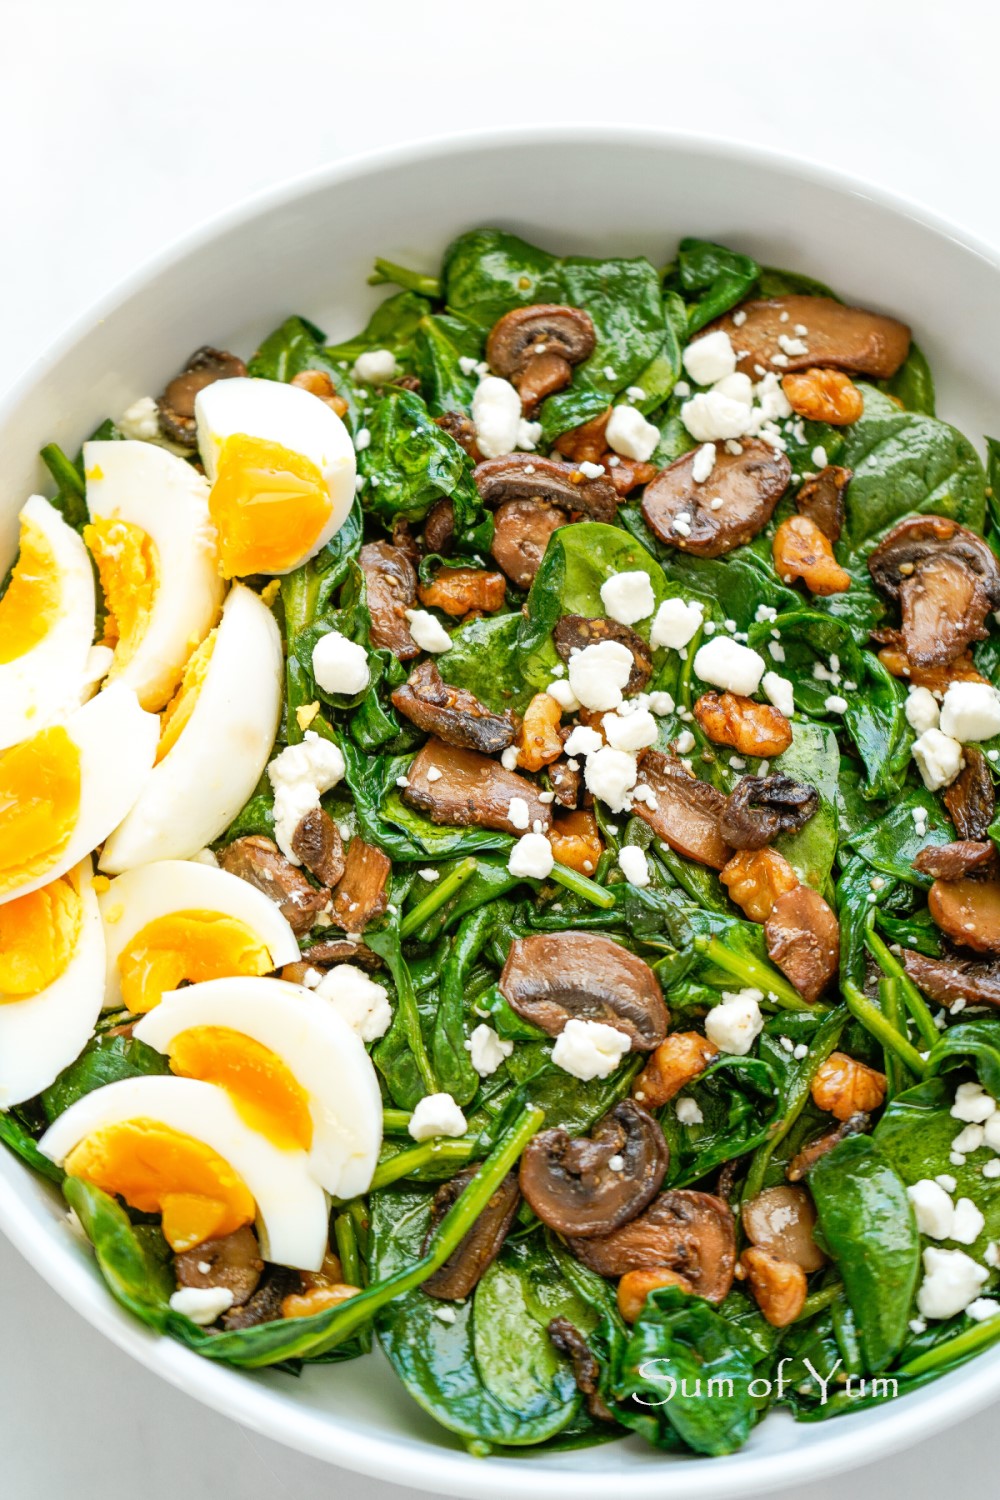 Warm Spinach Salad with soft-boiled Eggs